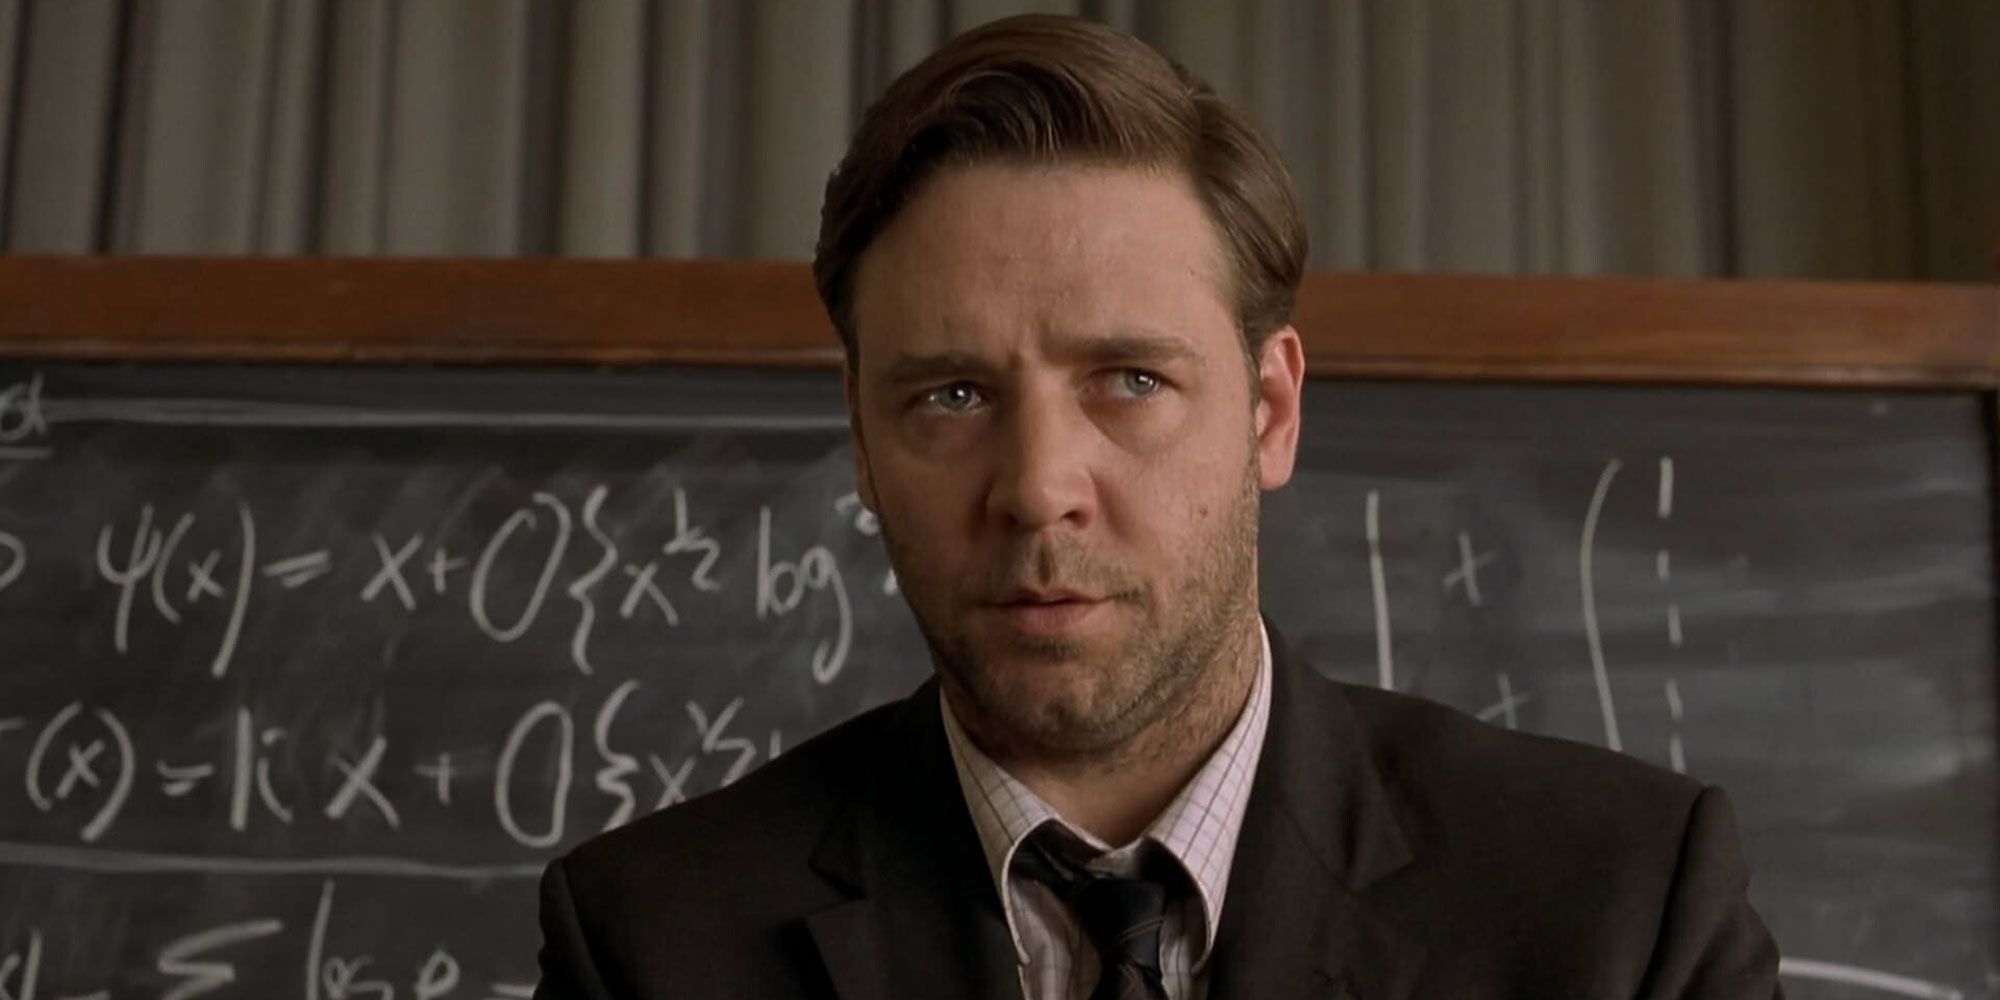 Russell Crowe has a five o'clock shadow and a thousand-yard stare in front of a math blackboard in A Beautiful Mind.